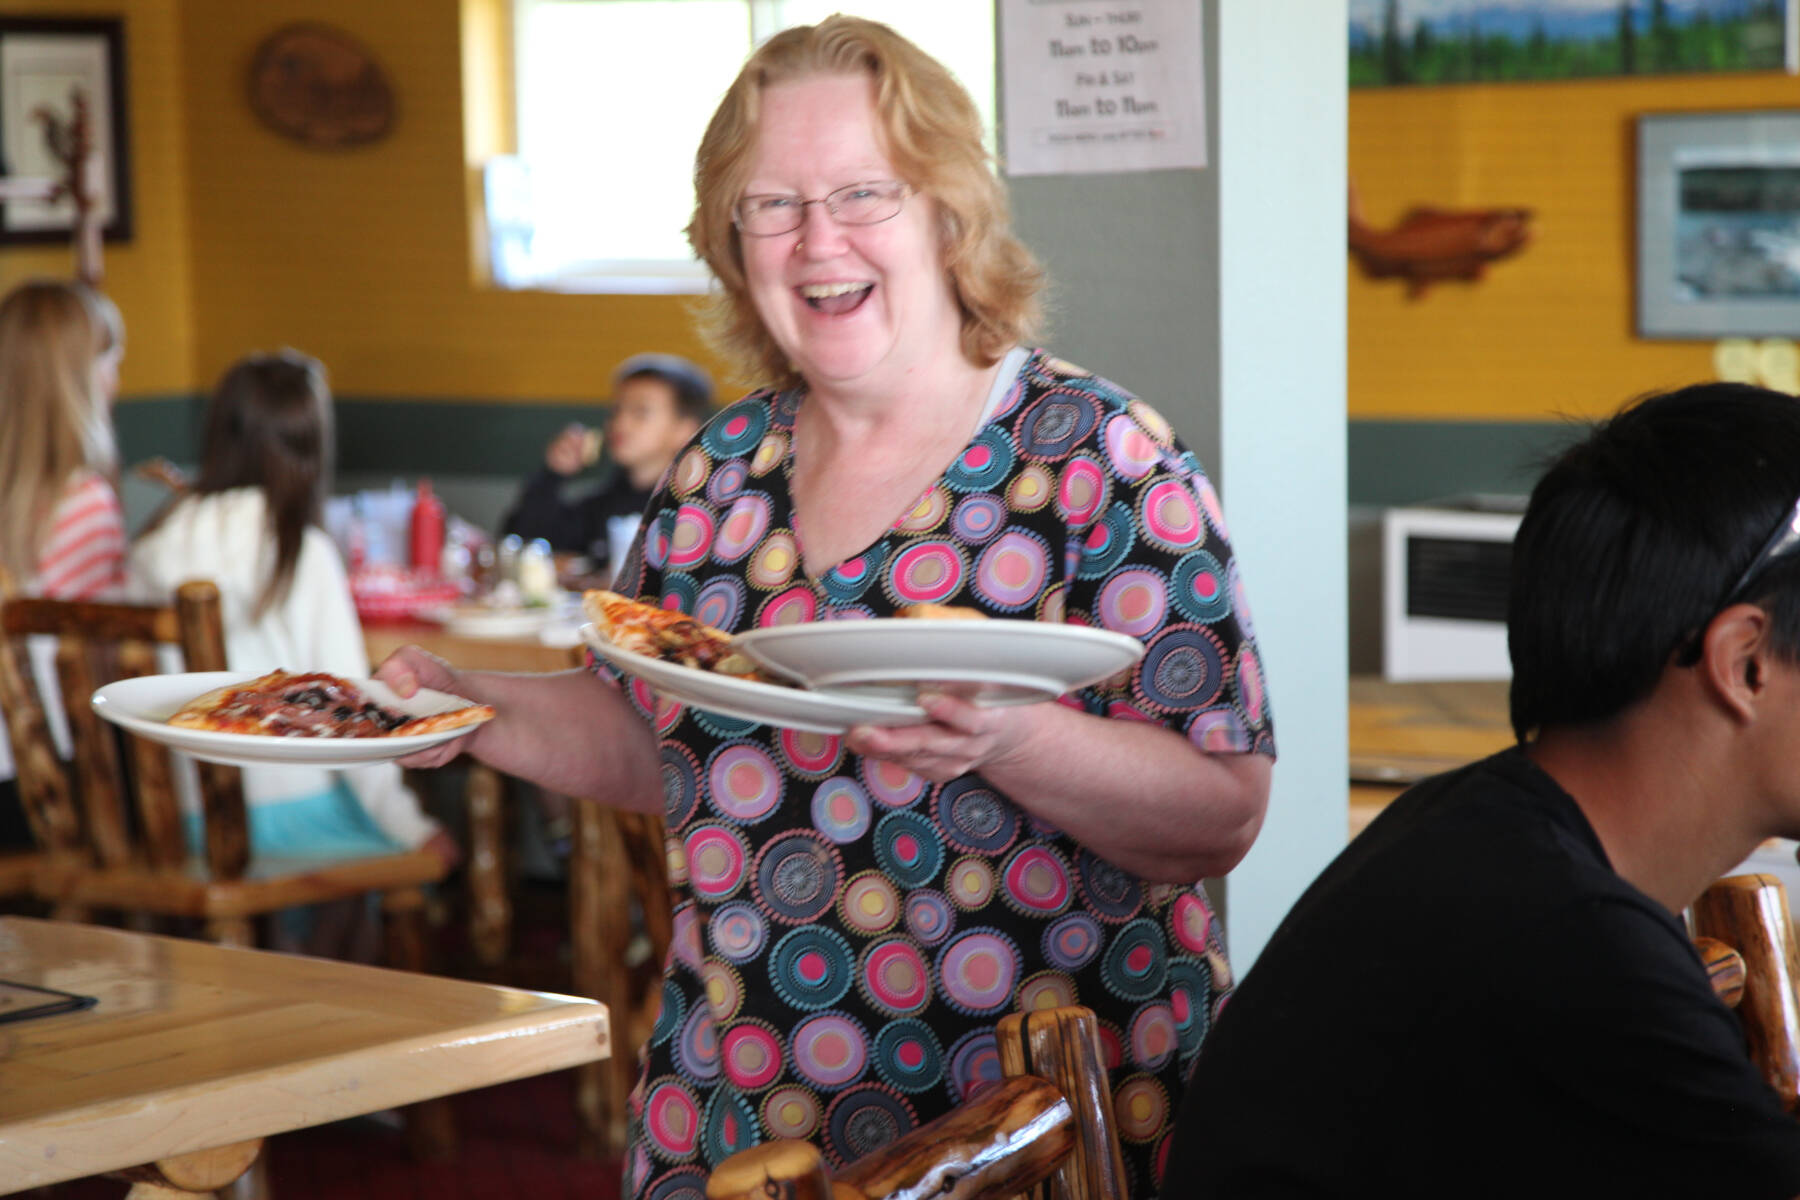 Co-owner and operator, Carol Cameron, serves pizza to customers at Rosco’s Pizza in Ninilchik, Alaska. Photo provided by Ross Cameron